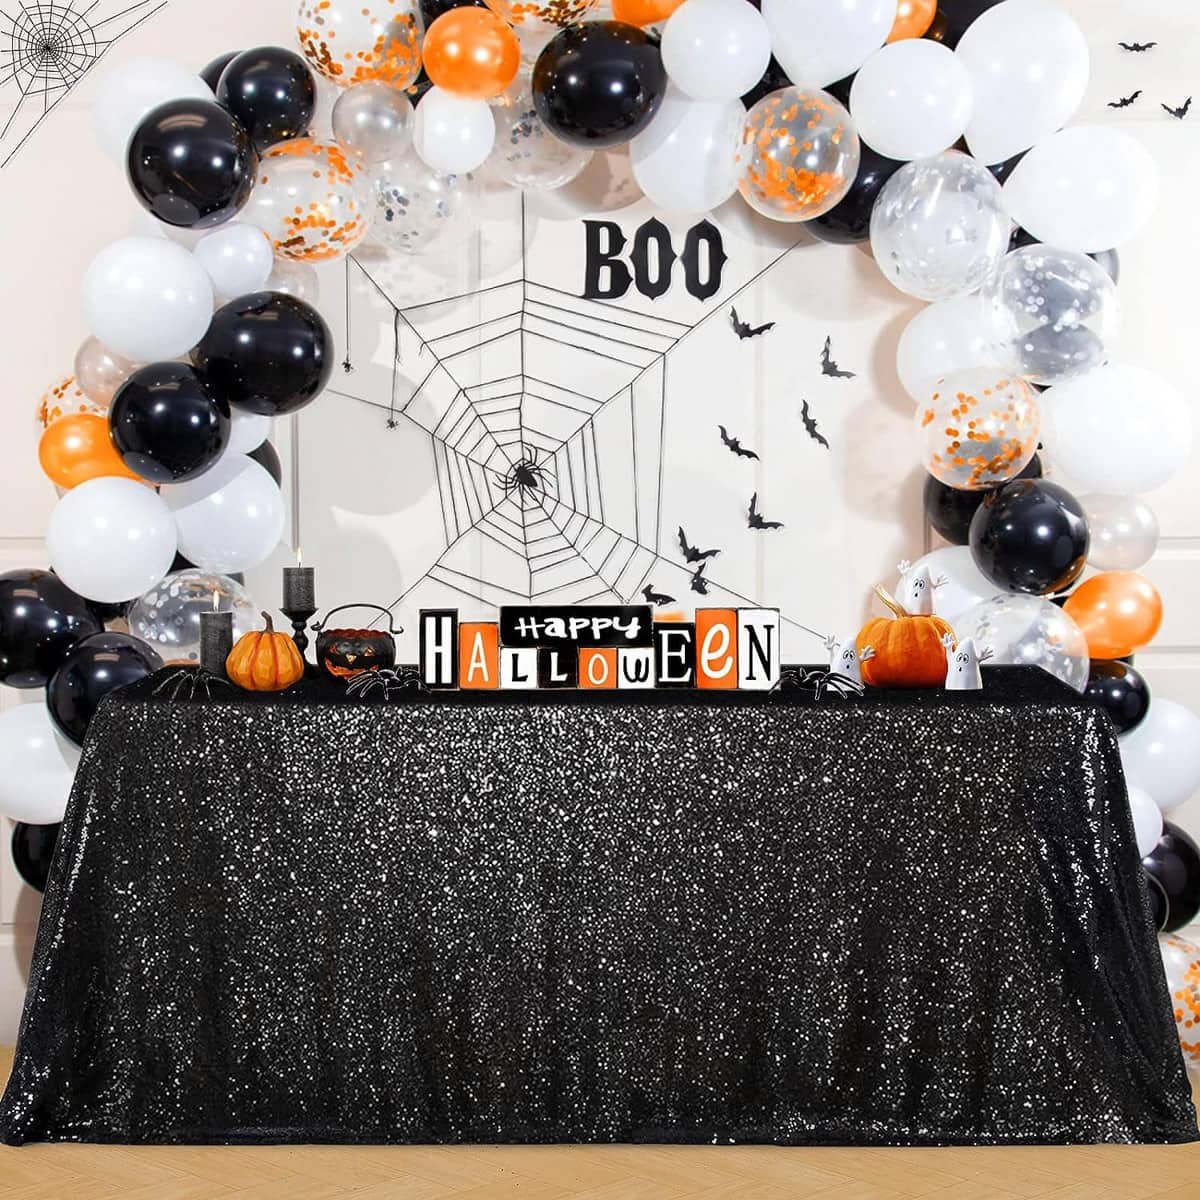 Black sequin tablecloth with Halloween balloons and decorations.